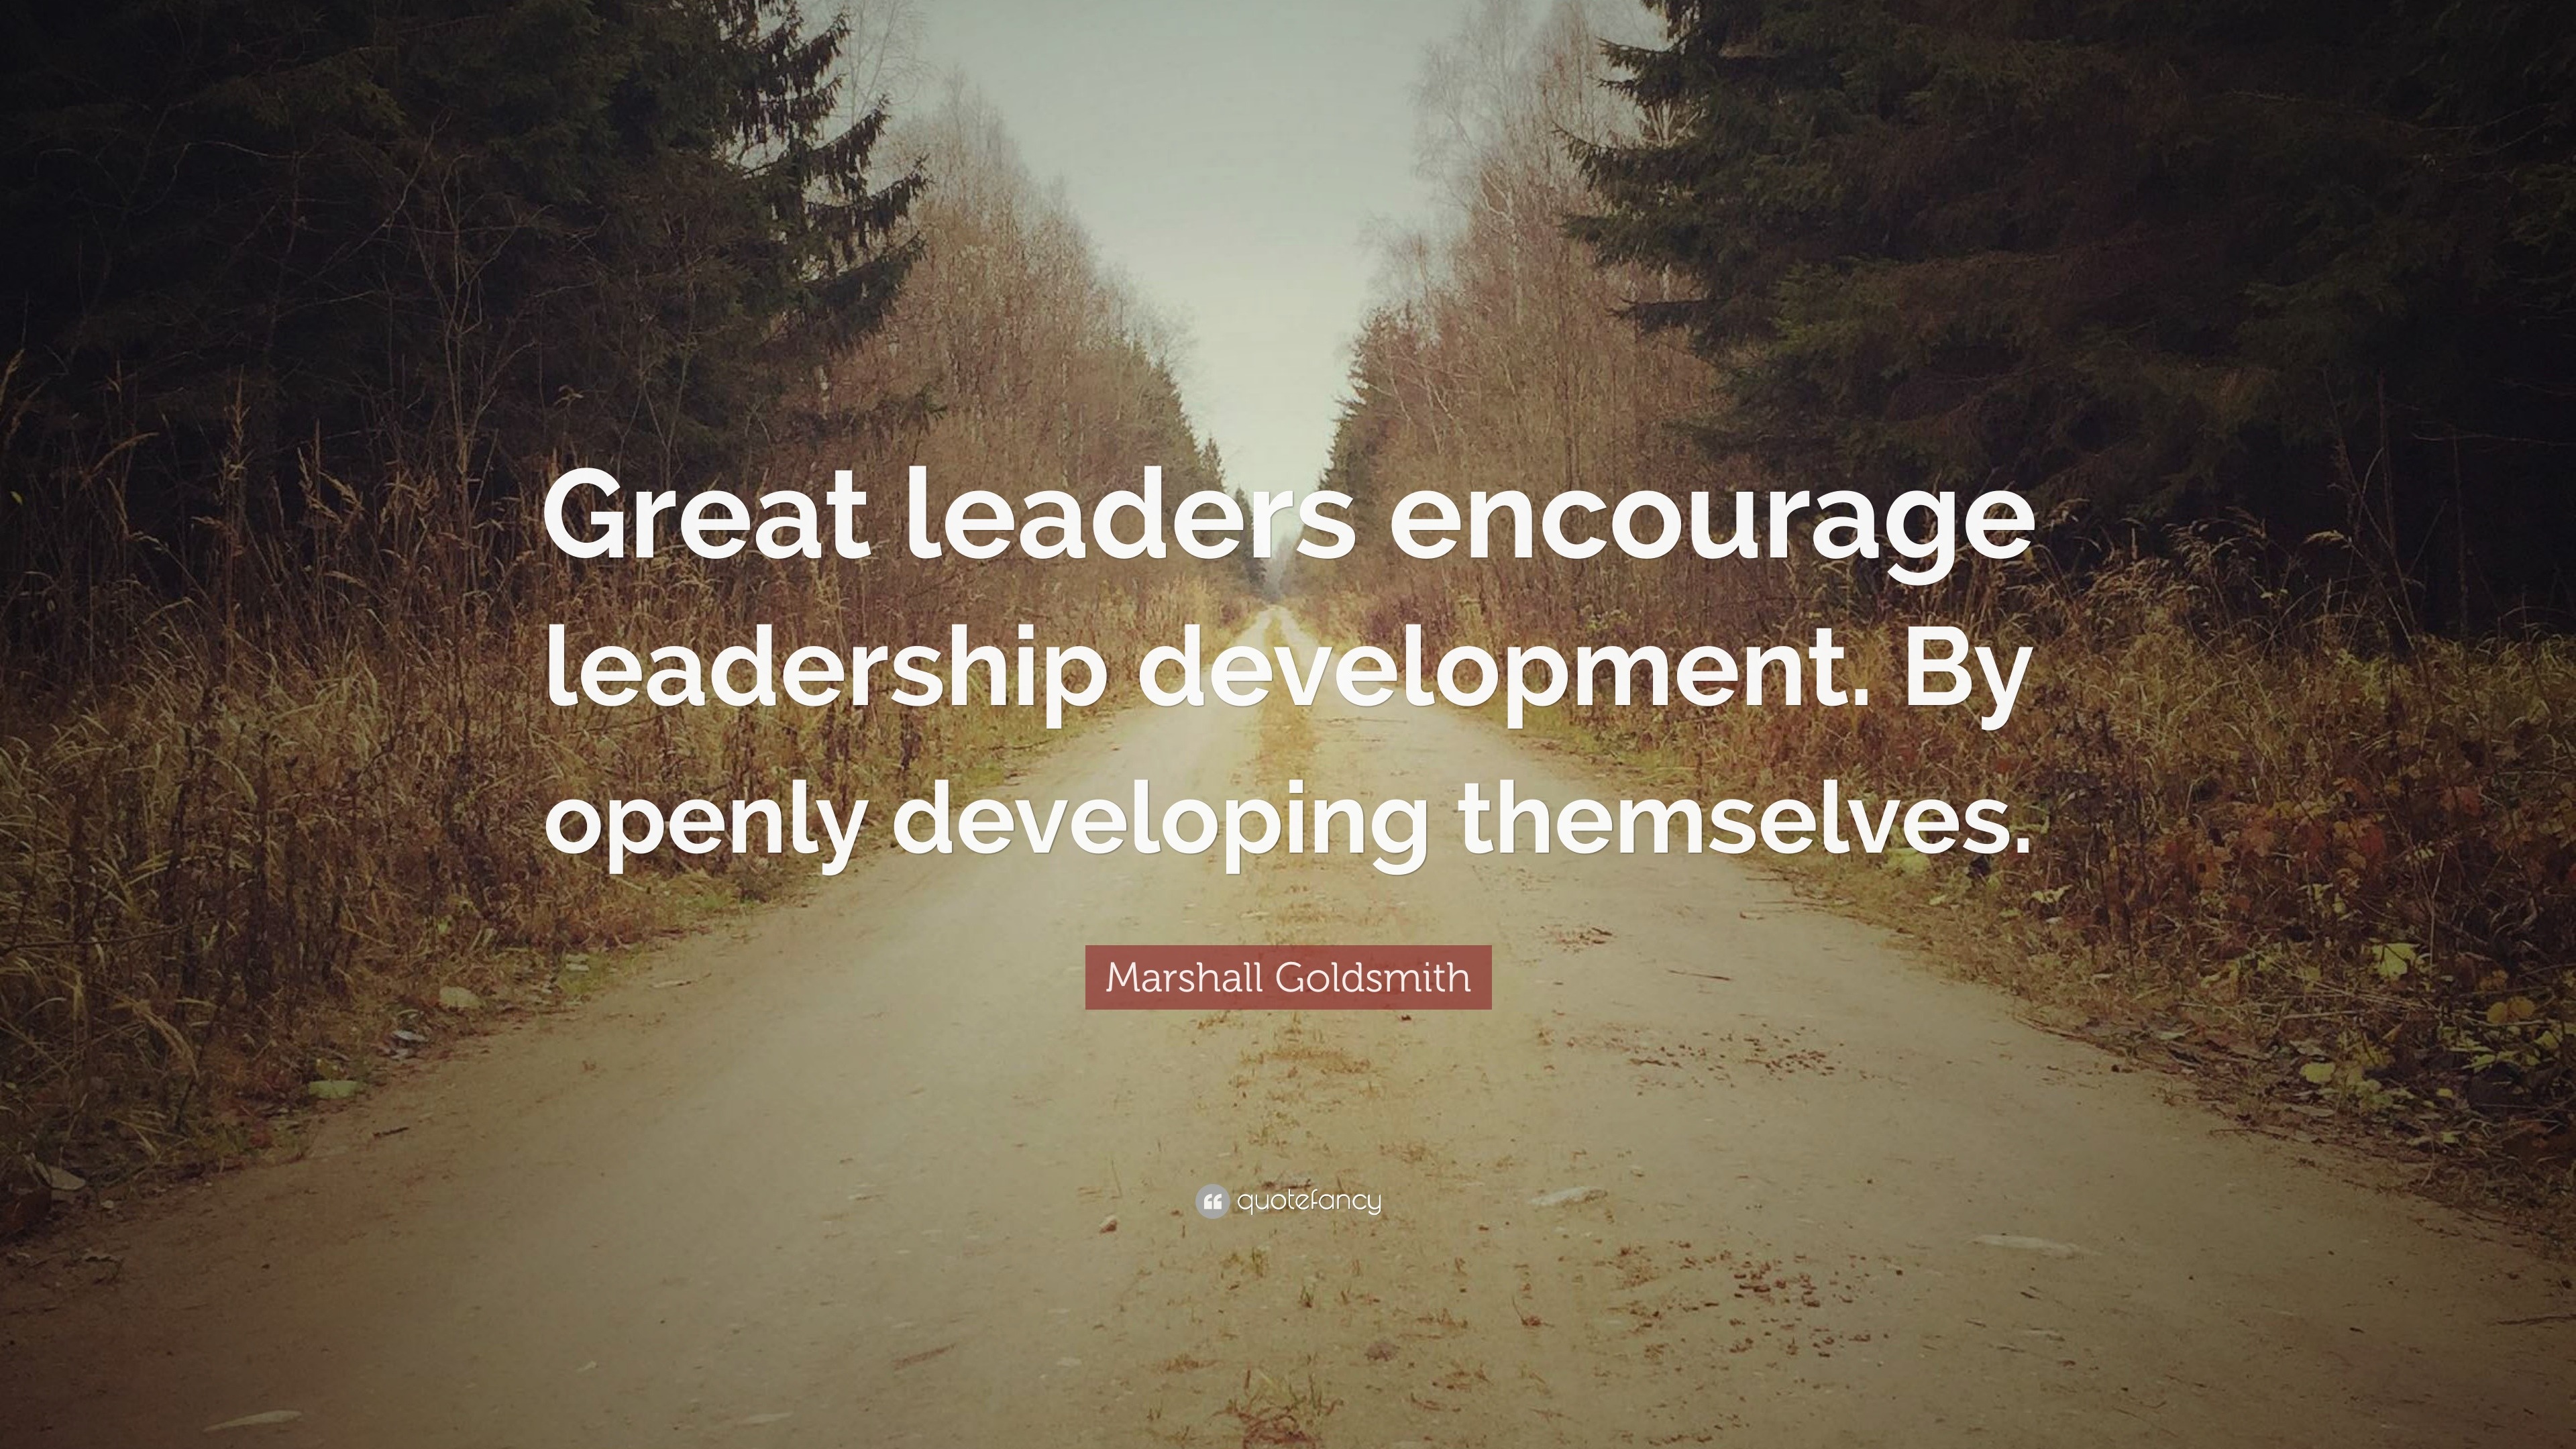 Marshall Goldsmith Quote “Great leaders encourage